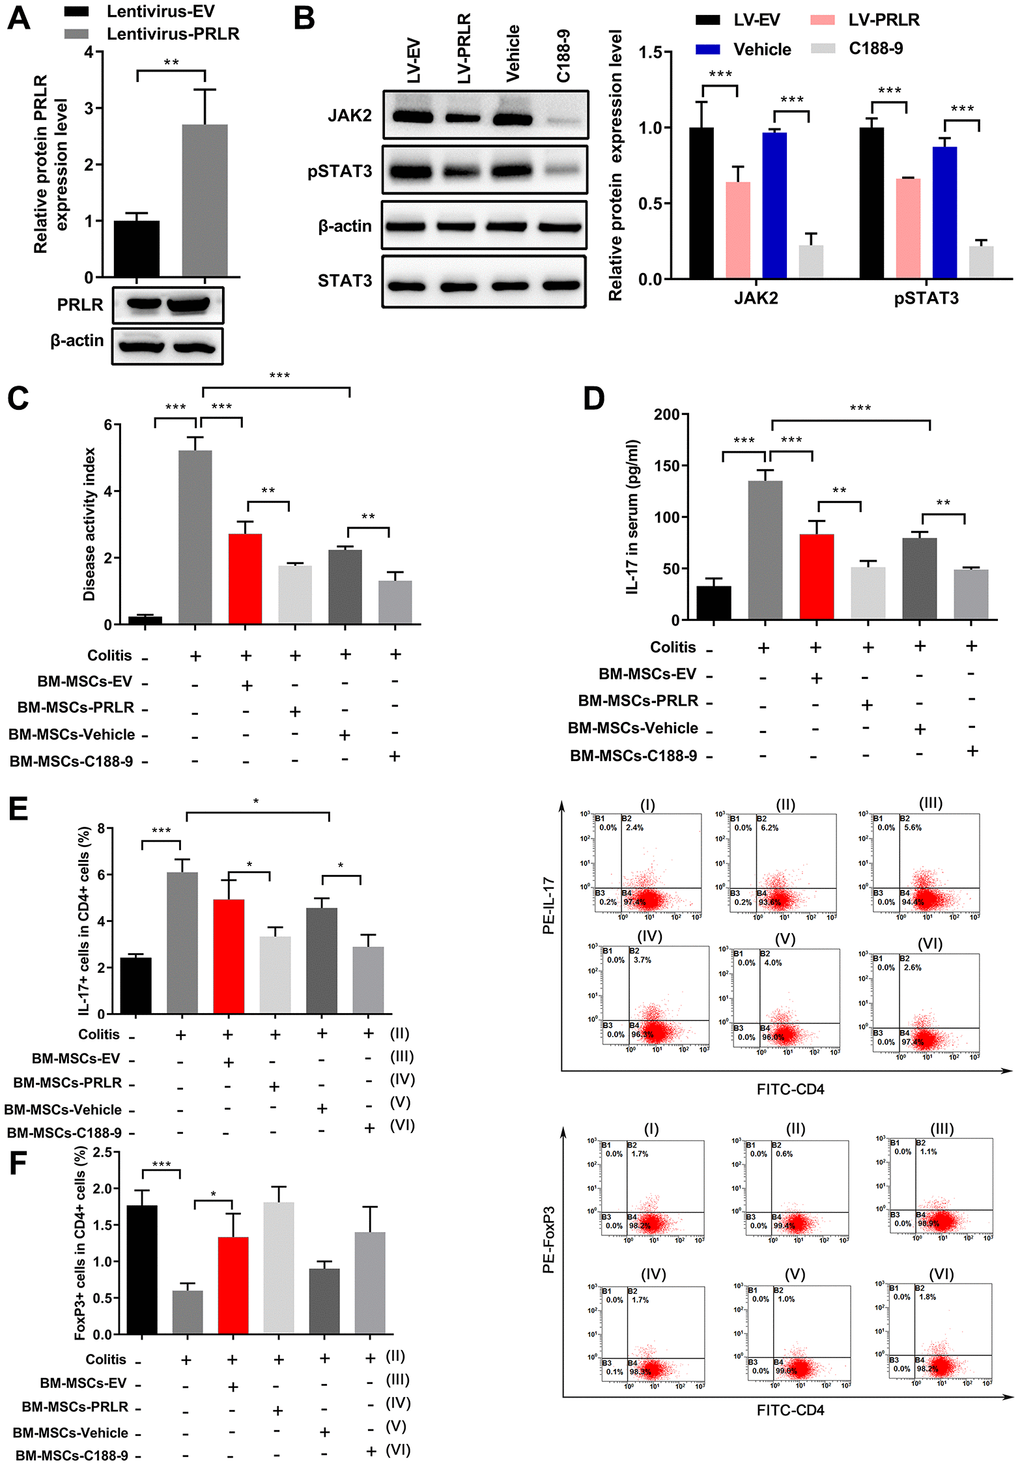 C188-9 treatment enhanced the effect of PRLR on regulation of Th17/Treg balance. (A) Confirmation of overexpression of PRLR in BM-MSCs using western blotting. (B) The protein levels of JAK2 and pSTAT3 in mandibular BM-MSCs were quantitated by western blot assays after overexpression of PRLR or treatment with C188-9. (C–F) Mandibular BM-MSCs from periodontitis mice were infected with PRLR-expressing lentivirus or empty vector virus, or treated with STAT3 inhibitor C188-9 or vehicle. Acute colitis in mice was induced by administering 3% (w/v) dextran sulfate sodium (DSS) through drinking water, and mice were fed ad libitum for 10 days. Control BM-MSCs or PRLR-overexpressing BM-MSCs, or C118-9-pretreated BM-MSCs (0.2 × 106 cells) were infused into colitis mice (n = 5 mice per group) intravenously at day 3 after feeding DSS water. Serum and blood samples from all mice were harvested at day 10 after the DSS water was provided. (C) Disease activity index was measured at 7 days after infusion of BM-MSCs with overexpression of PRLR or with C188-9 treatment. (D) Soluble IL-17 level in mouse serum was measured by ELISA. (E, F) The percentages of CD4+IL-17+ (E), and the percentages of CD4+FoxP3+ Tregs (F) among blood CD4+ T cells from mice of the indicated groups were measured. n = 5 for each group; *P **P ***P 